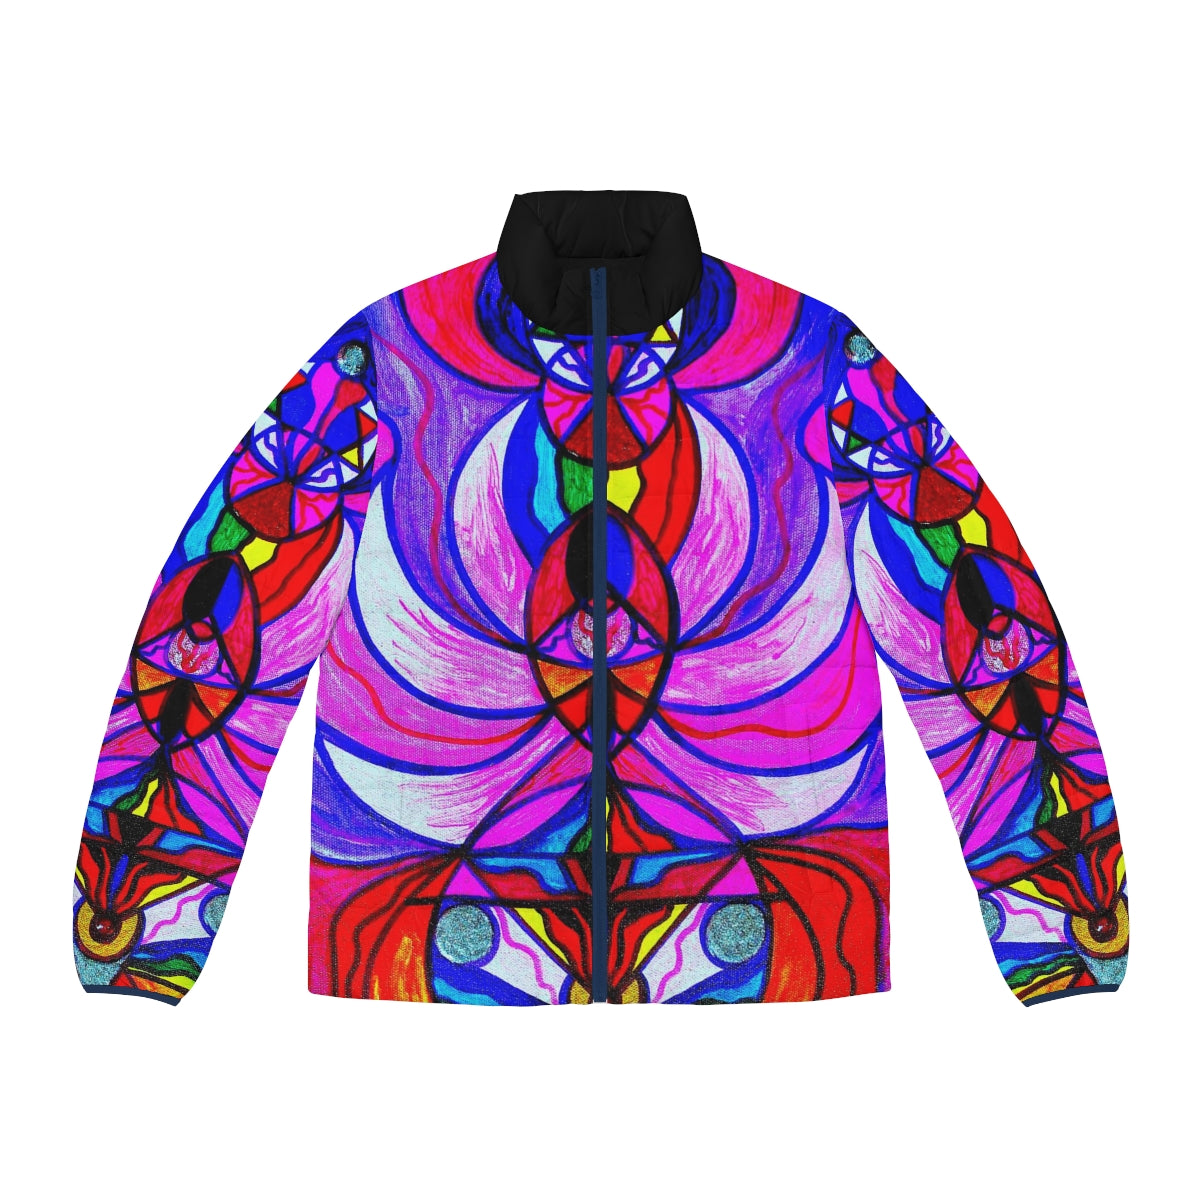 we-offer-the-best-prices-on-the-best-of-divine-feminine-activation-unisex-puffer-jacket-aop-online-now_1.jpg